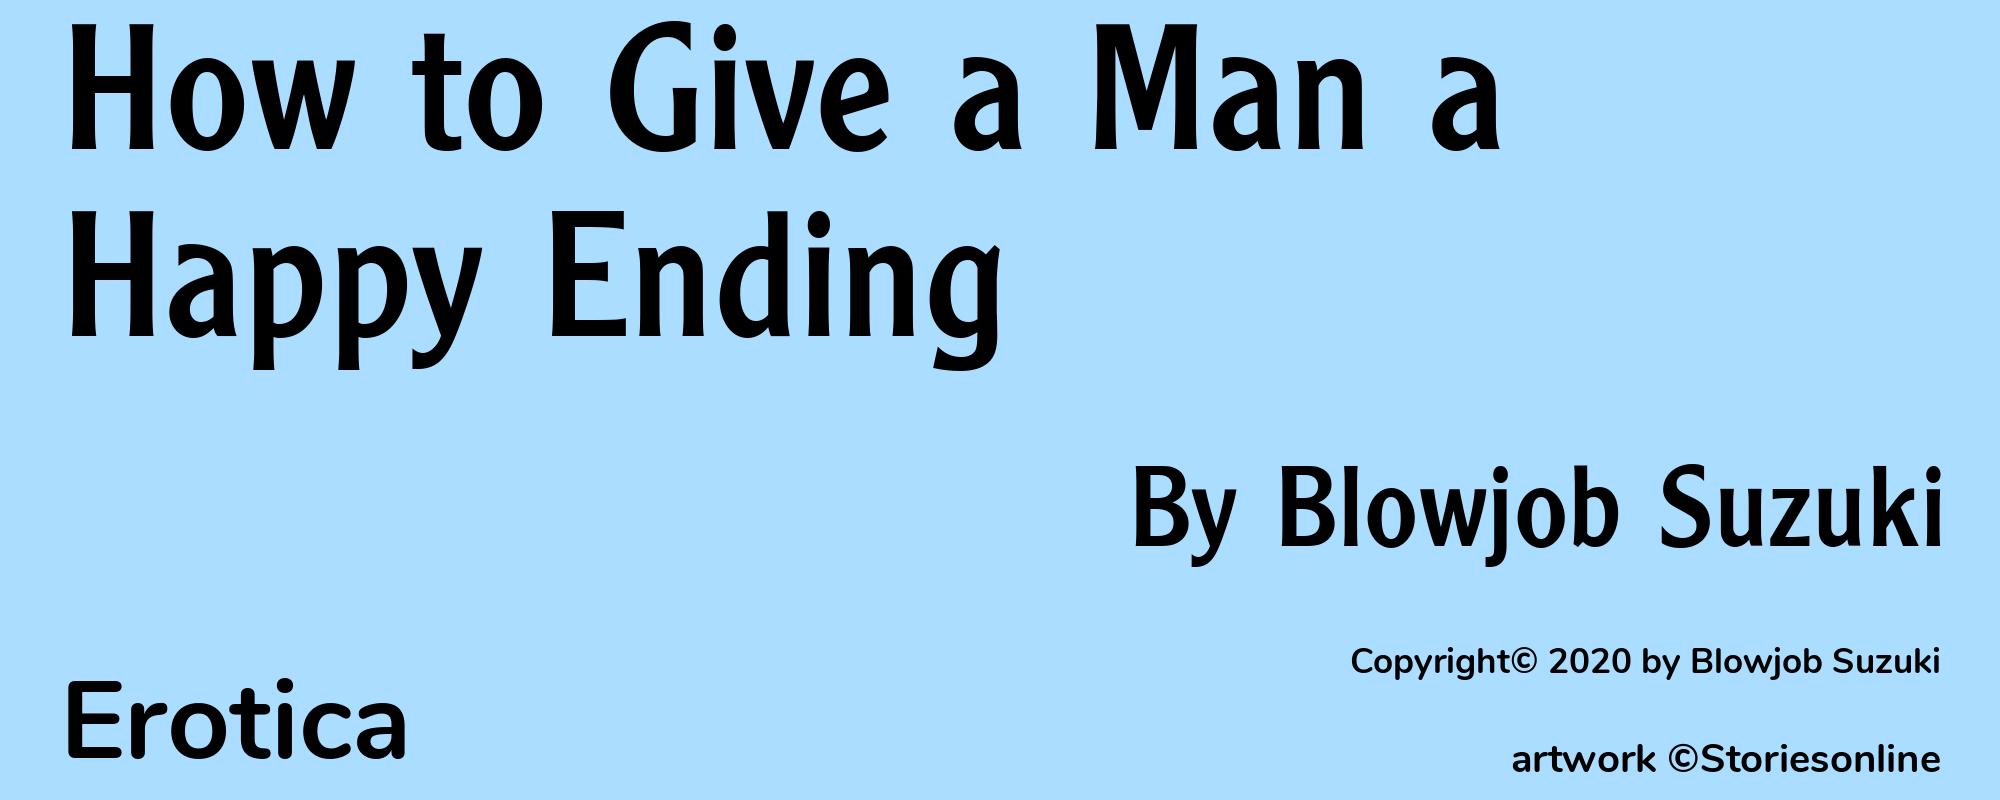 How to Give a Man a Happy Ending - Cover